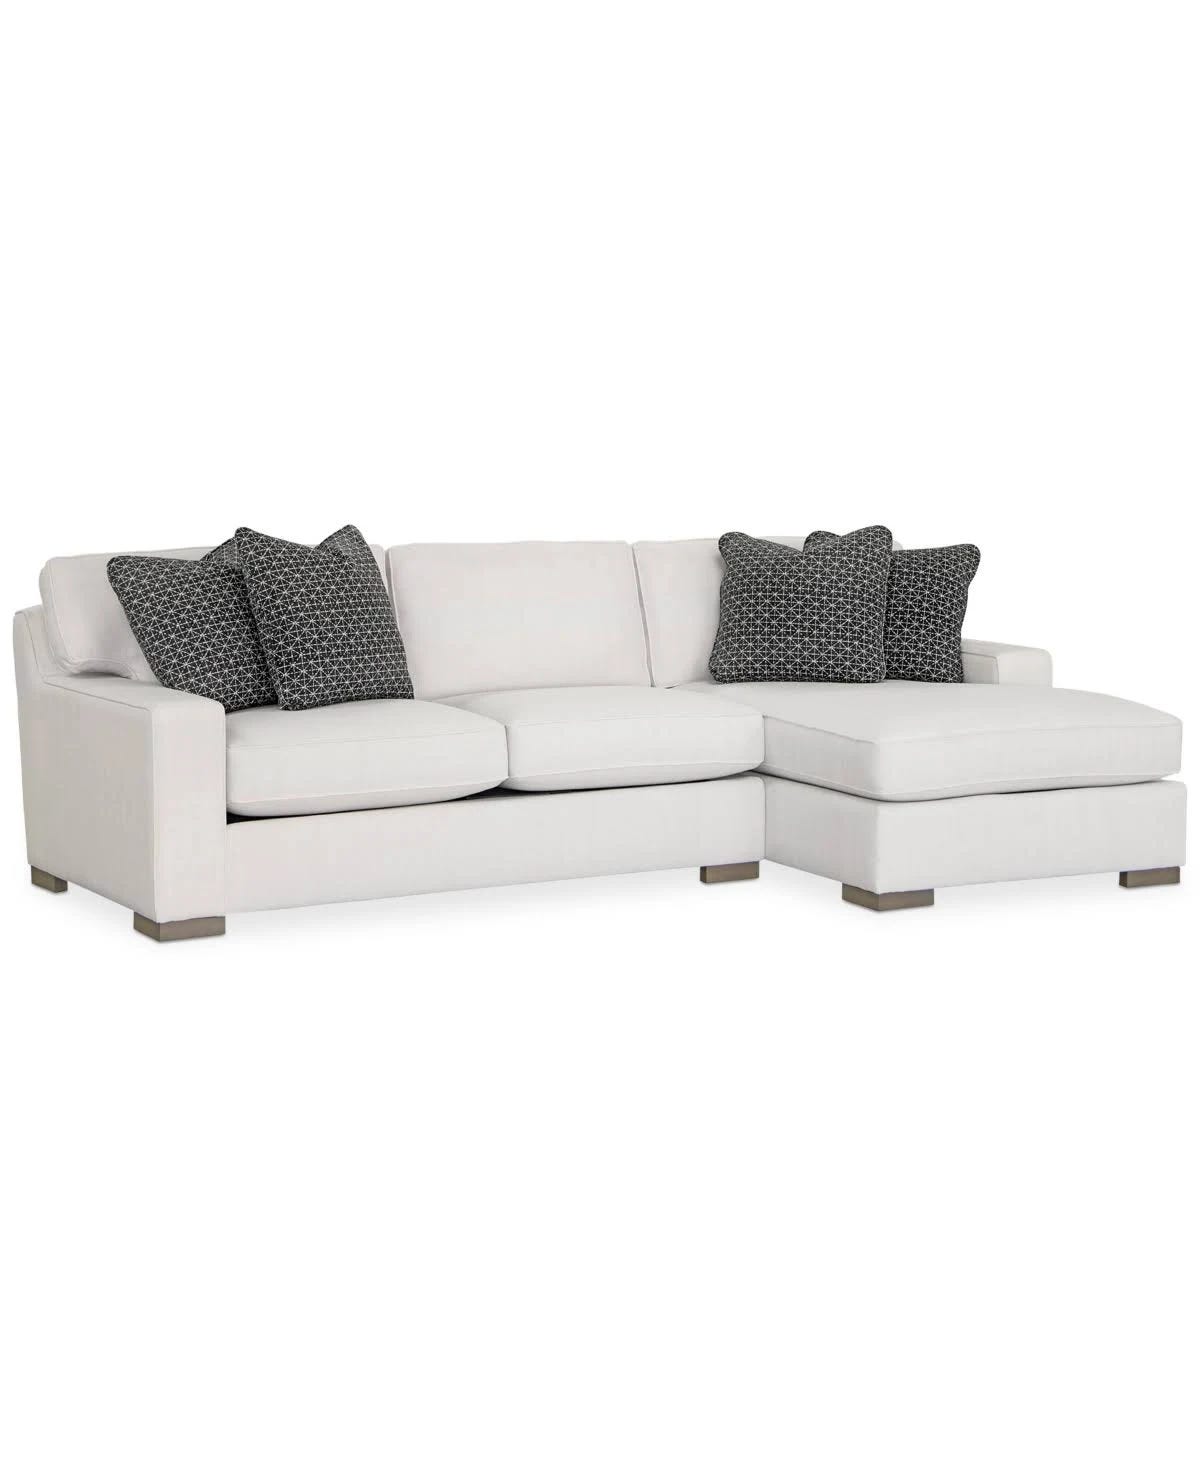 Doverly Macy's Salt-Hued 2-Piece Sectional with Chaise | Image